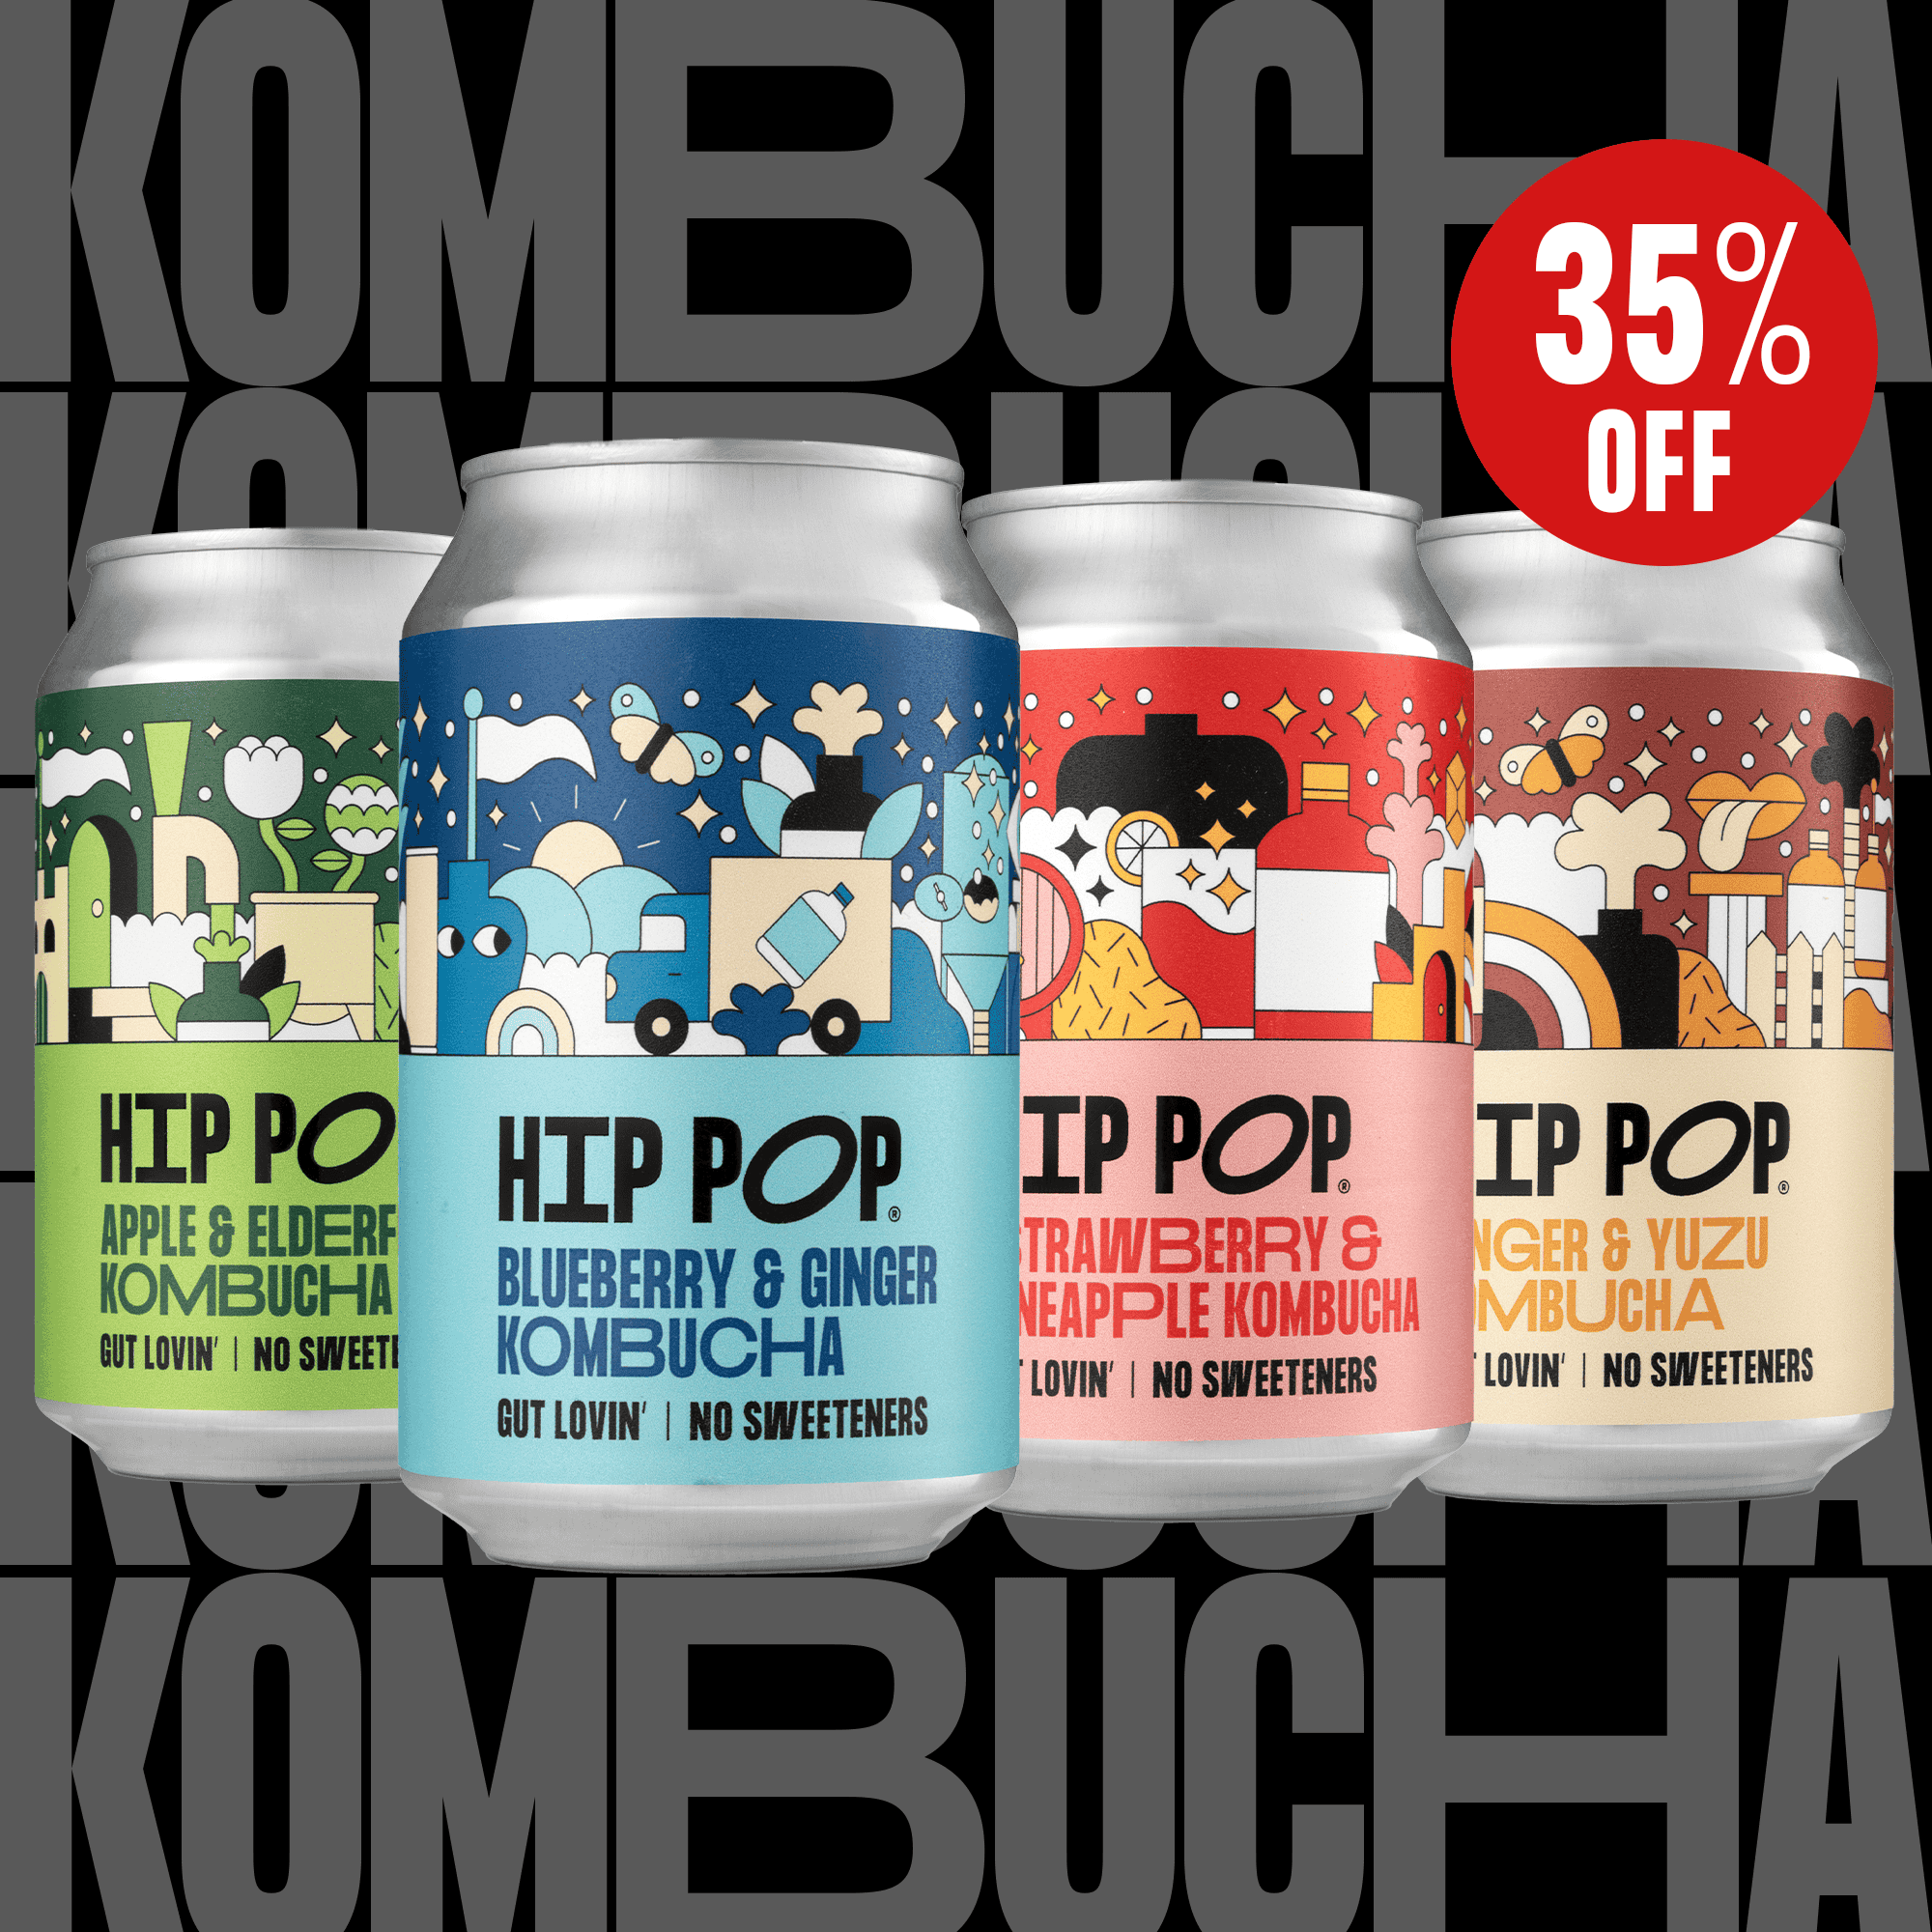 TEST OTO DO NOT ORDER 6-Can Kombucha Taster Case - 330ml Cans